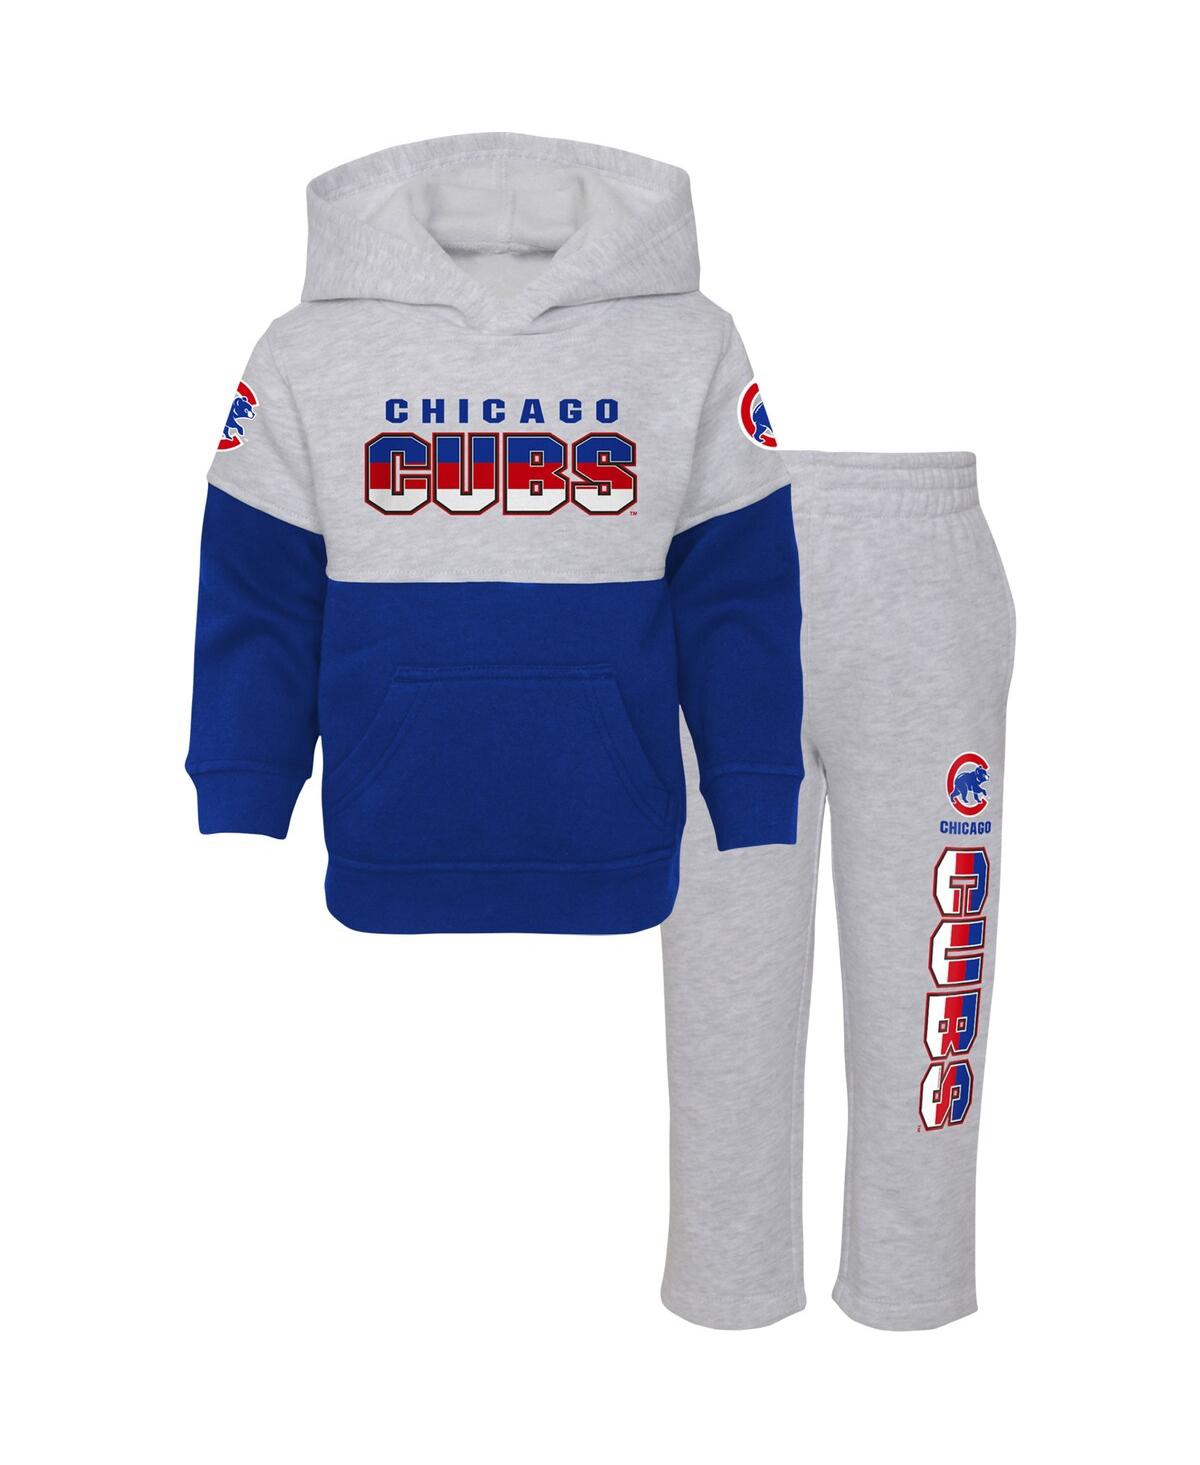 Shop Outerstuff Infant Boys And Girls Royal And Heather Gray Chicago Cubs Playmaker Pullover Hoodie And Pants Set In Royal,heather Gray